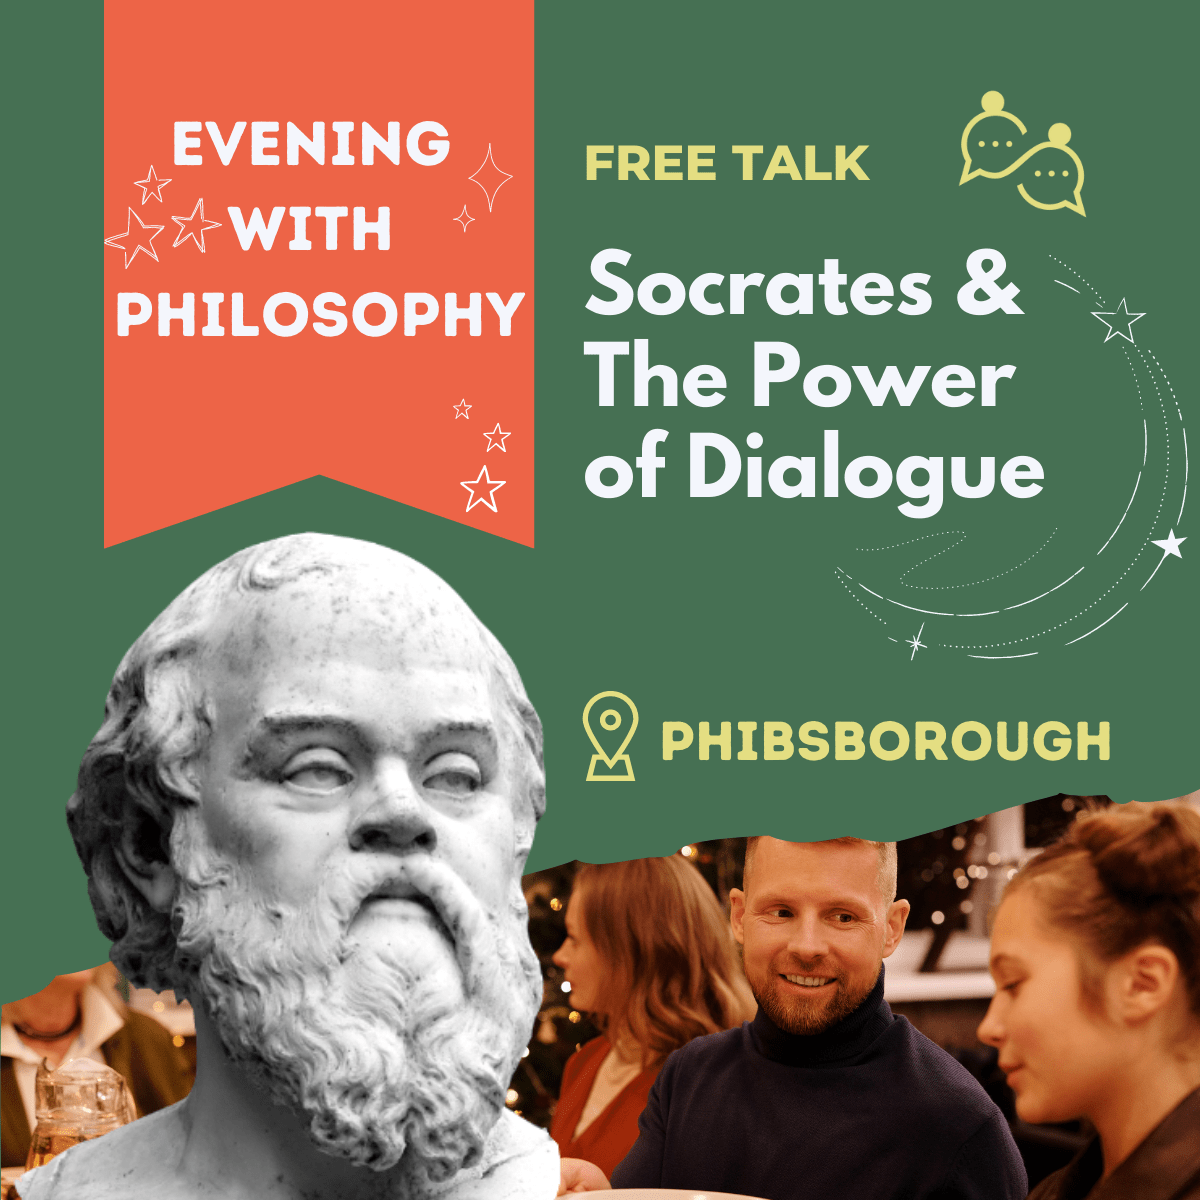 Socrates & The Power of Dialogue